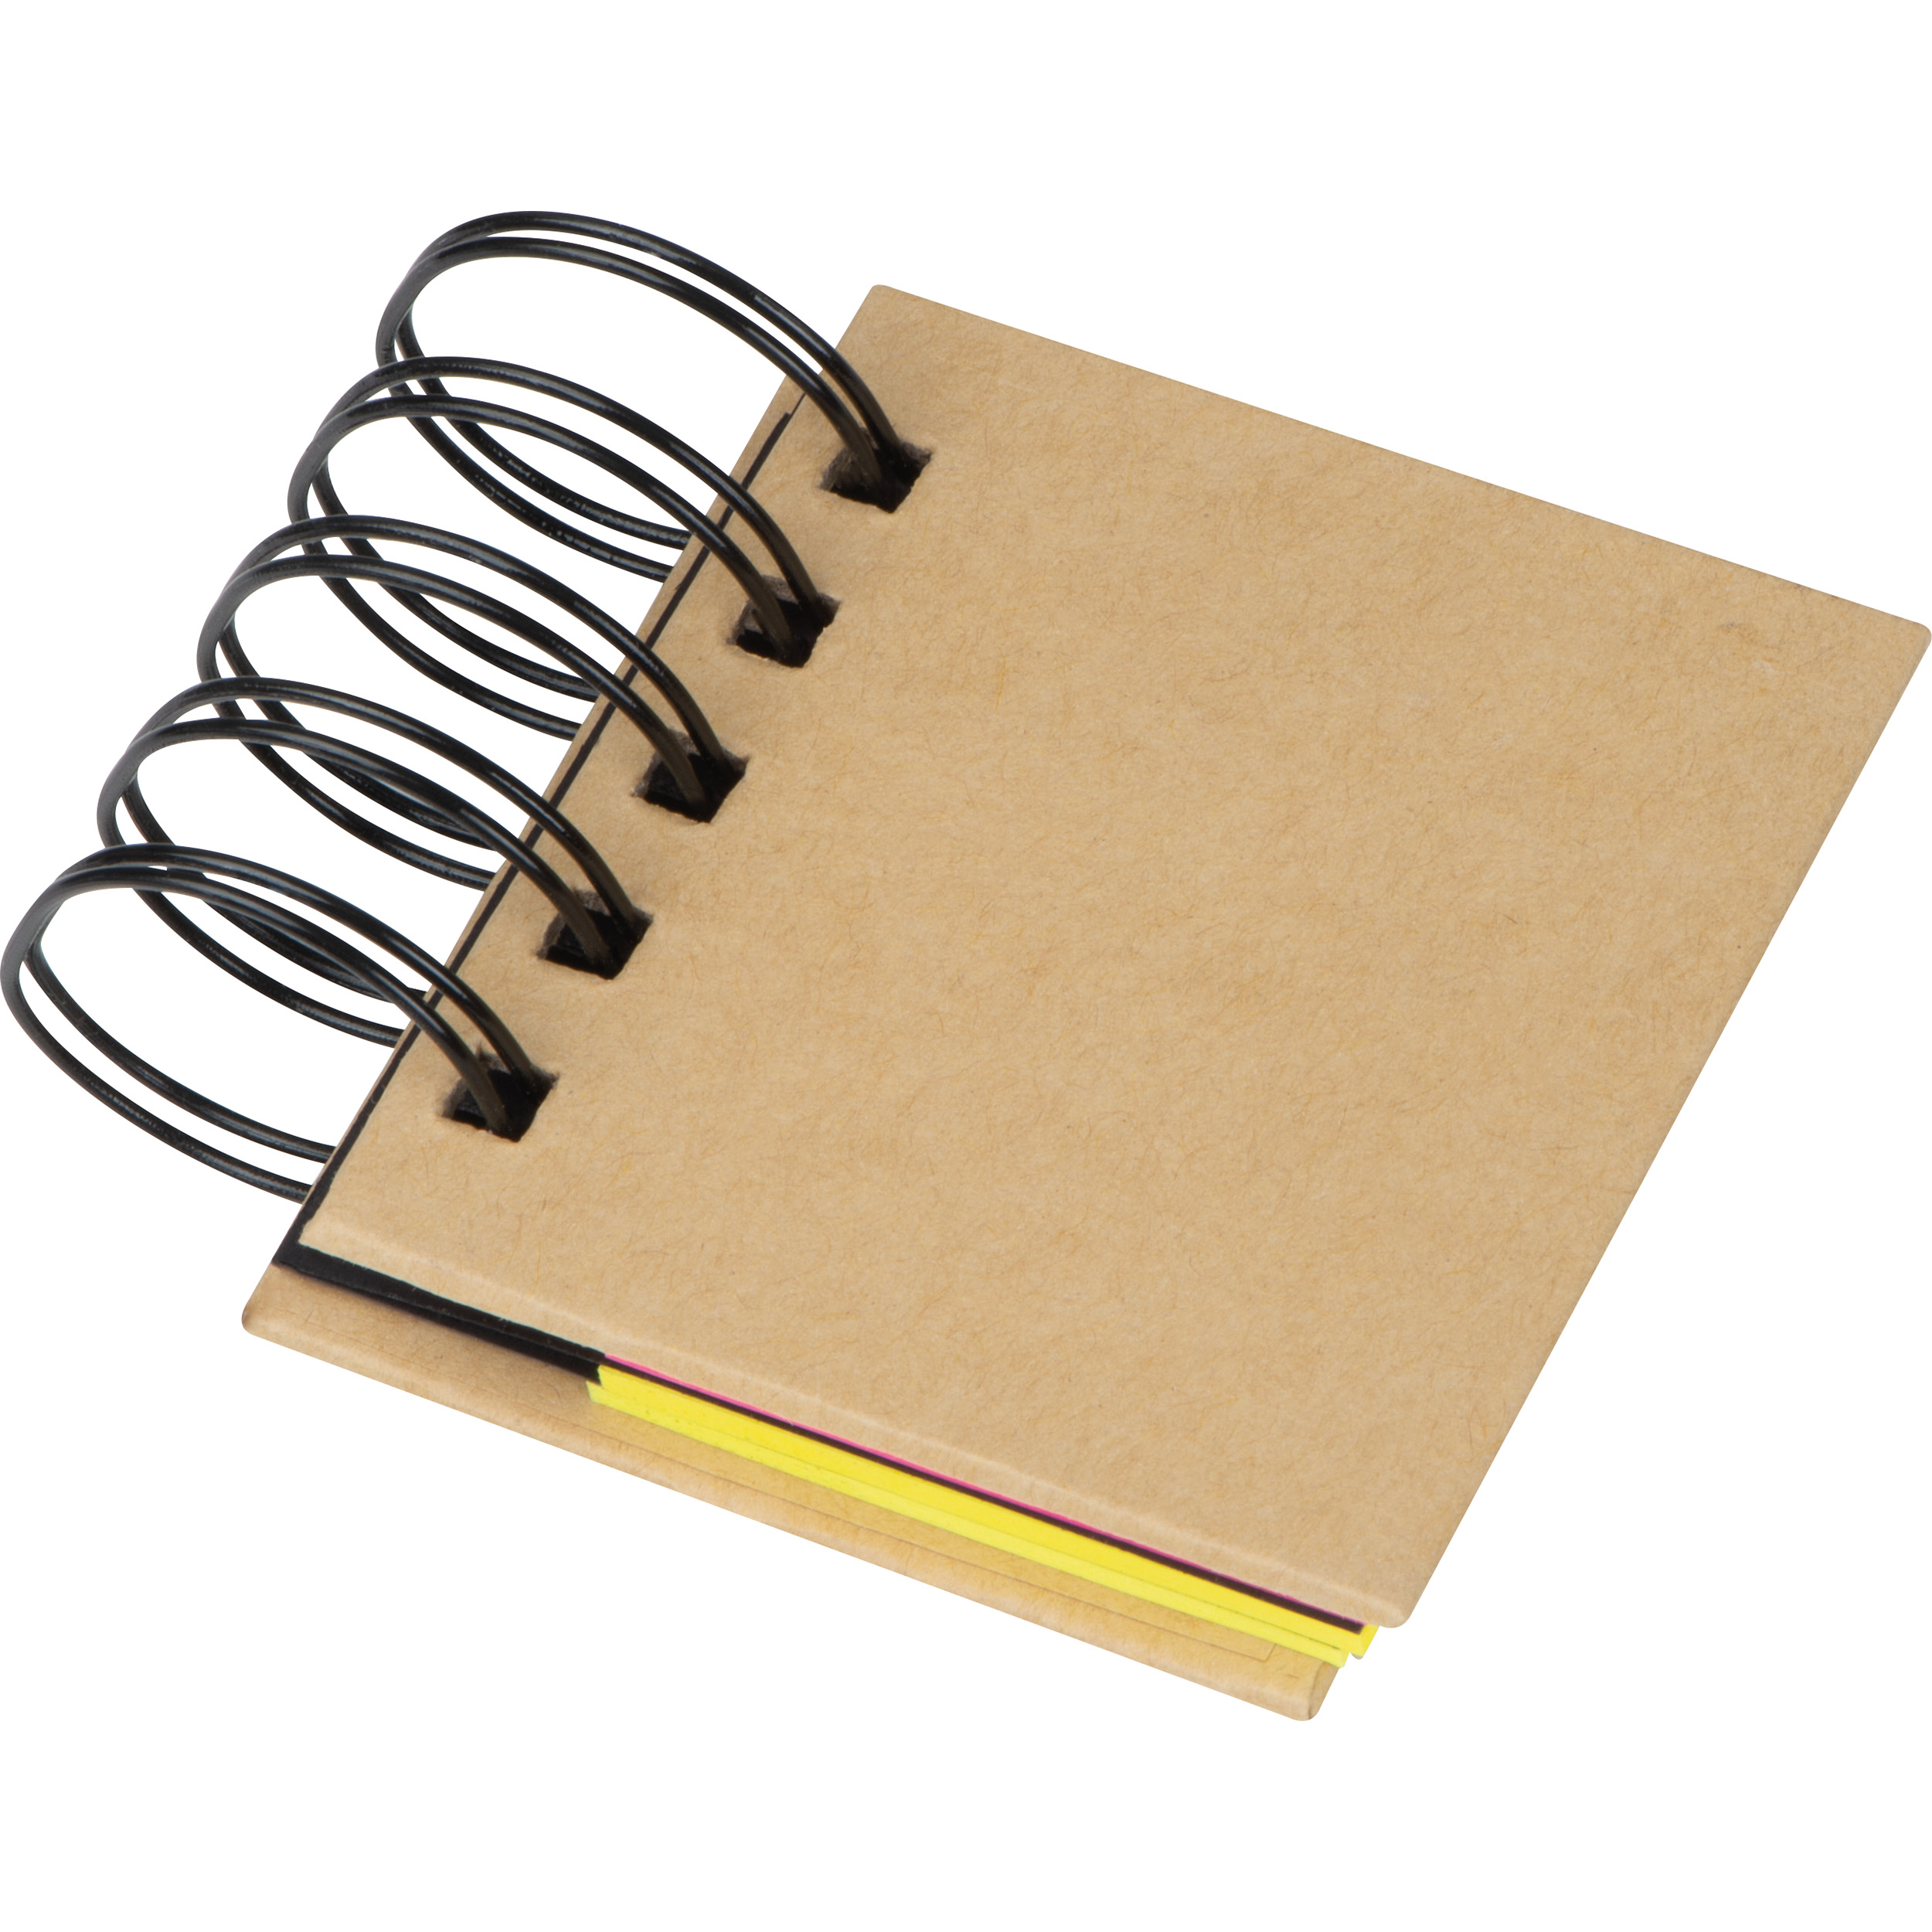 Small ring-binder with sticky notes